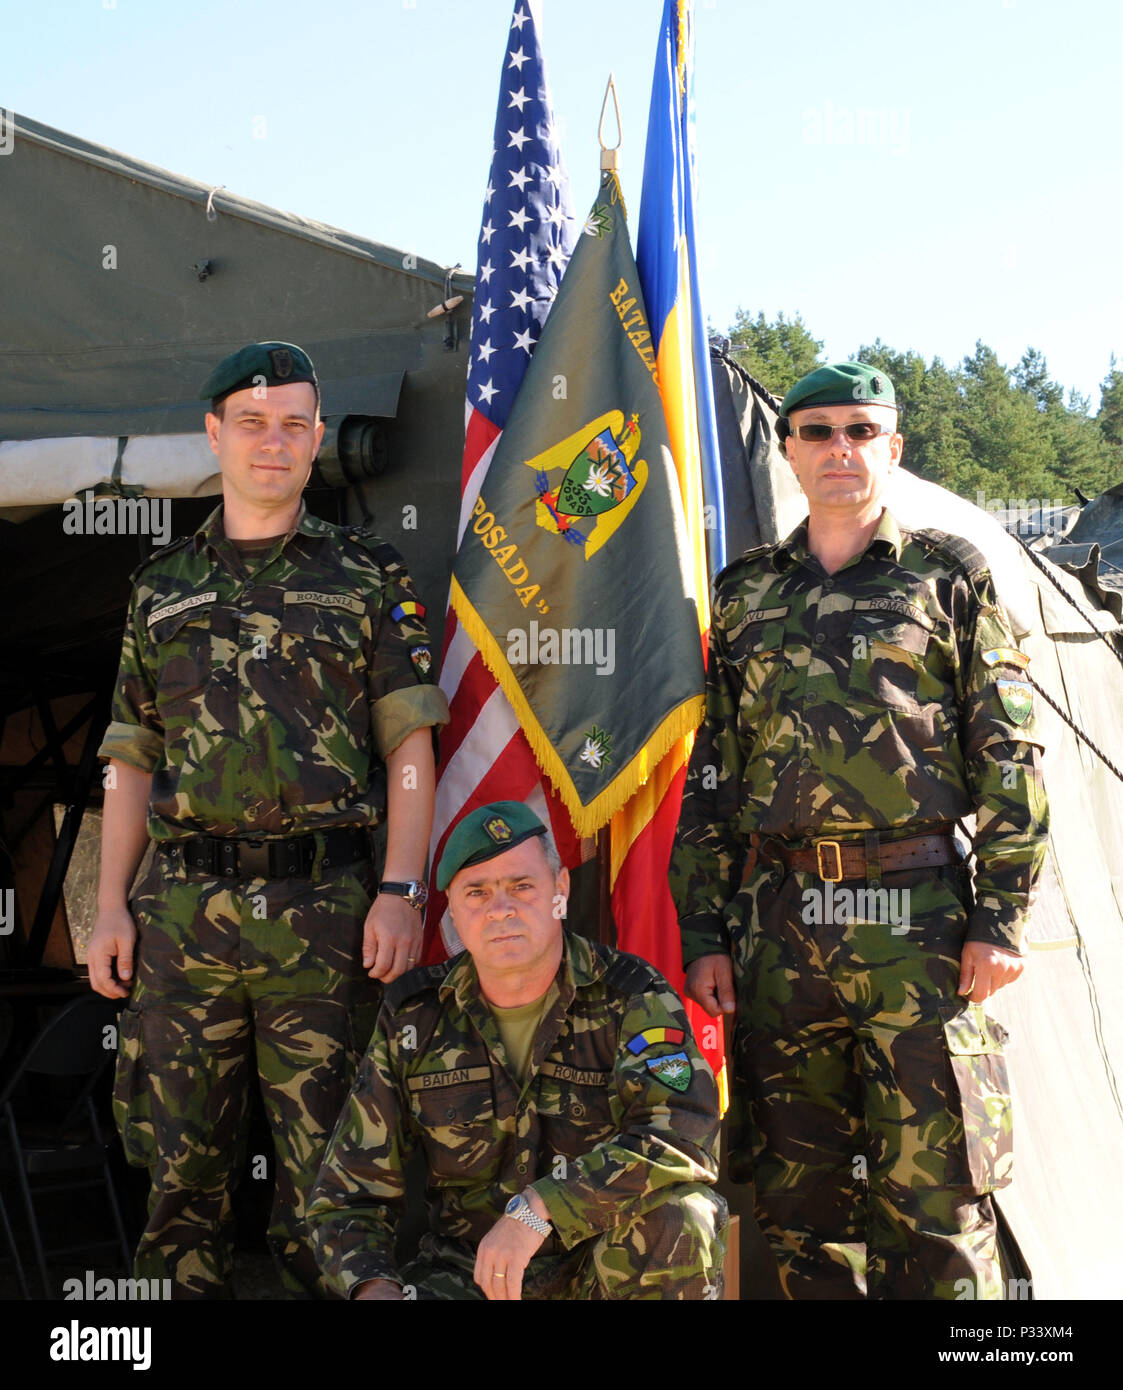 Soldiers from the Romanian Army proudly stand by their flag as they wait for their main convoy to arrive at the Joint Multinational Readiness Center in Hohenfels, Germany Aug. 31, 2016, for Exercise Combined Resolve VII, which is a 7th Army Training Command, U.S. Army Europe-directed exercise, taking place at the Grafenwoehr and Hohenfels Training Areas, Aug. 8 to Sept. 15, 2016. The exercise is designed to train the Army’s regionally allocated forces to the U.S. European Command. Combined Resolve VII includes more than 2,500 participants from 16 NATO and European partner nations. (U.S. Army p Stock Photo